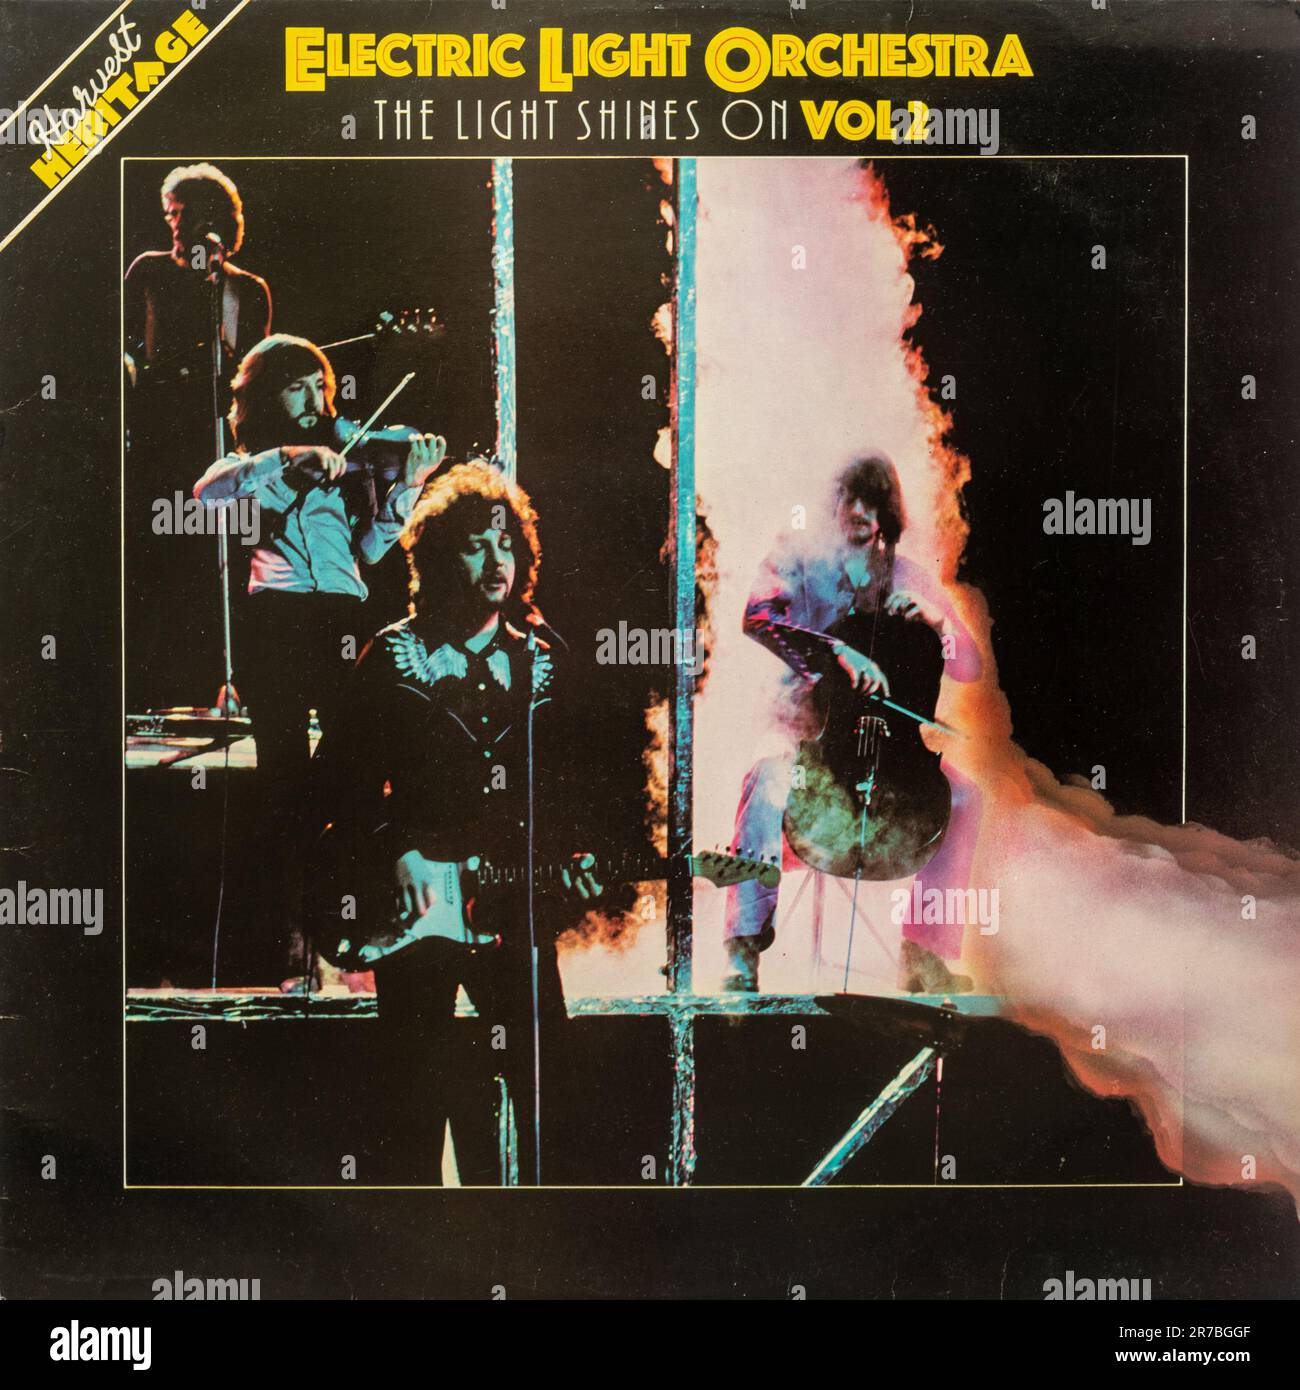 The Light Shines On Volume 2 by Electrric Light Orchestra, vinyl record cover Stock Photo